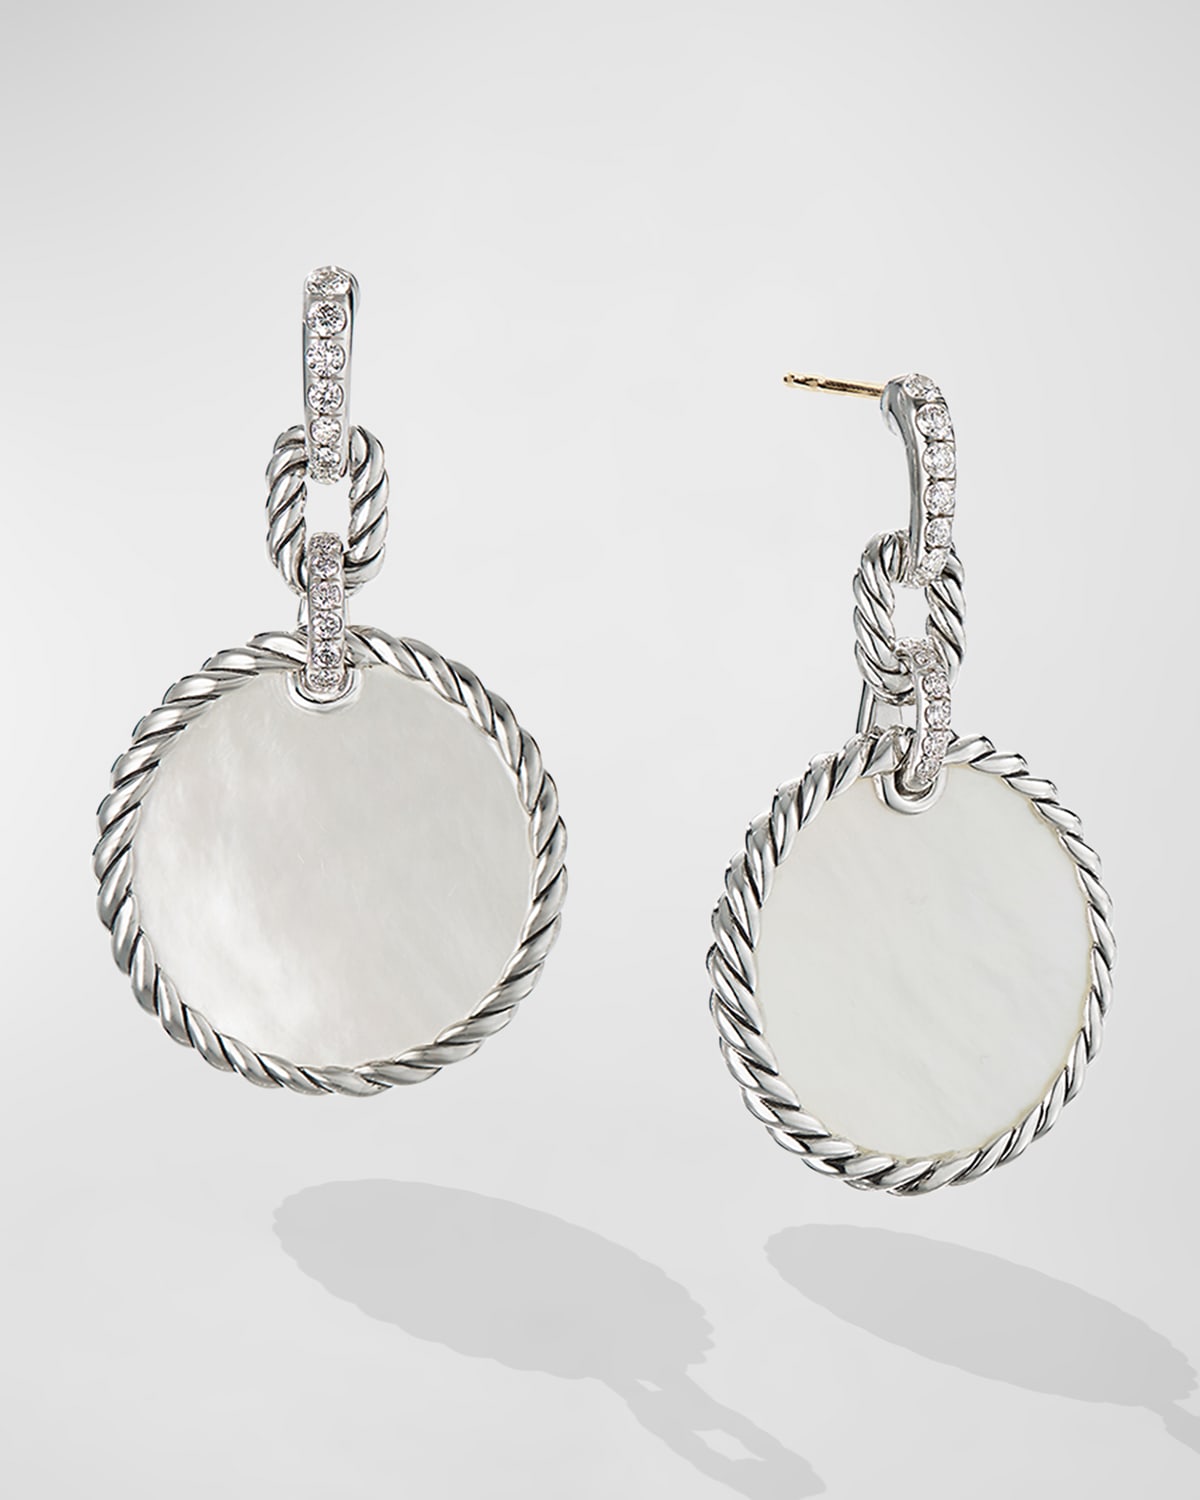 David Yurman DY Elements Drop Earrings with Mother-of-Pearl and Pave Diamonds, 19mm